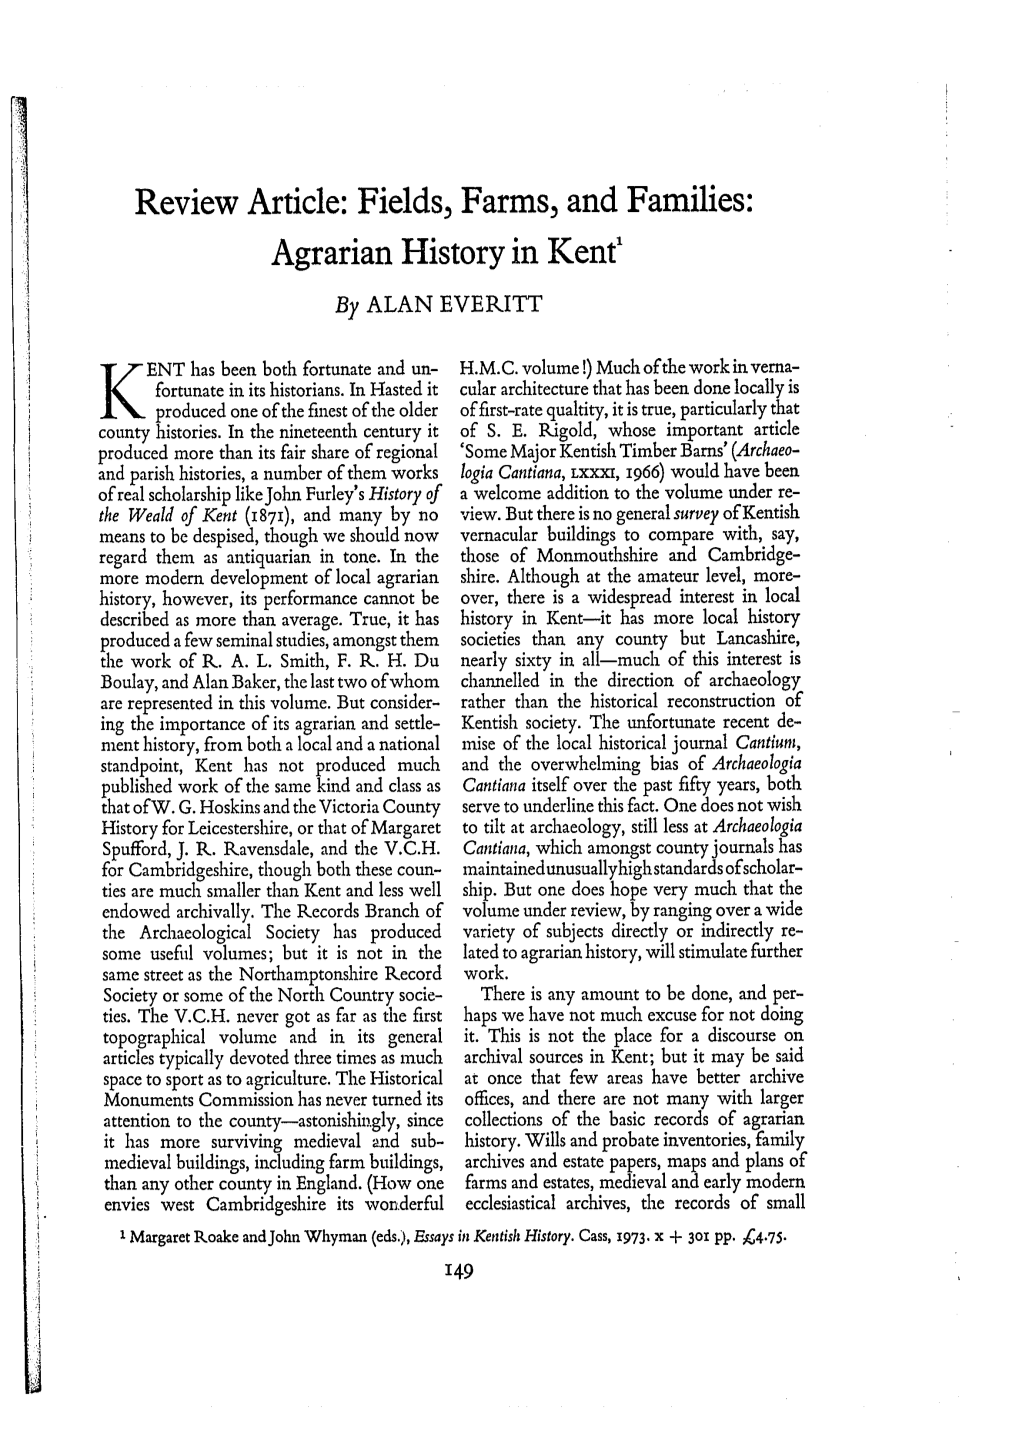 Review Article: Fields, Farms, and Families: Agrarian History in Kent 1 by ALAN V .P.ITT